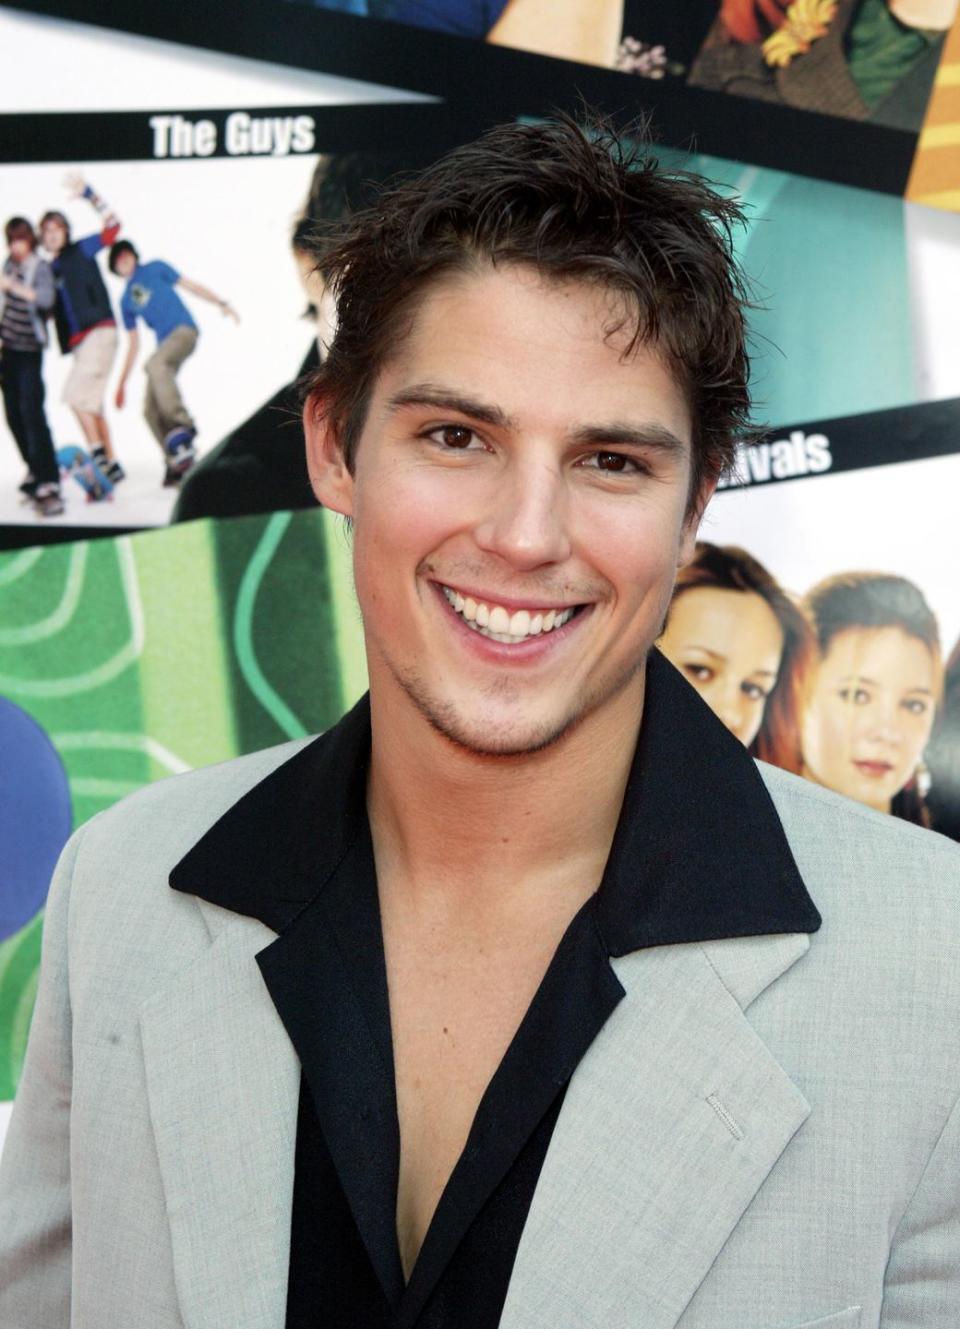 <p>The idea of a high school rising junior (senior?) who looks like Sean Faris circa 2004 having a crush on you when you were going to be a freshman in high school is next-level insane! But we ate it up in the movie <em>Sleepover.</em></p>